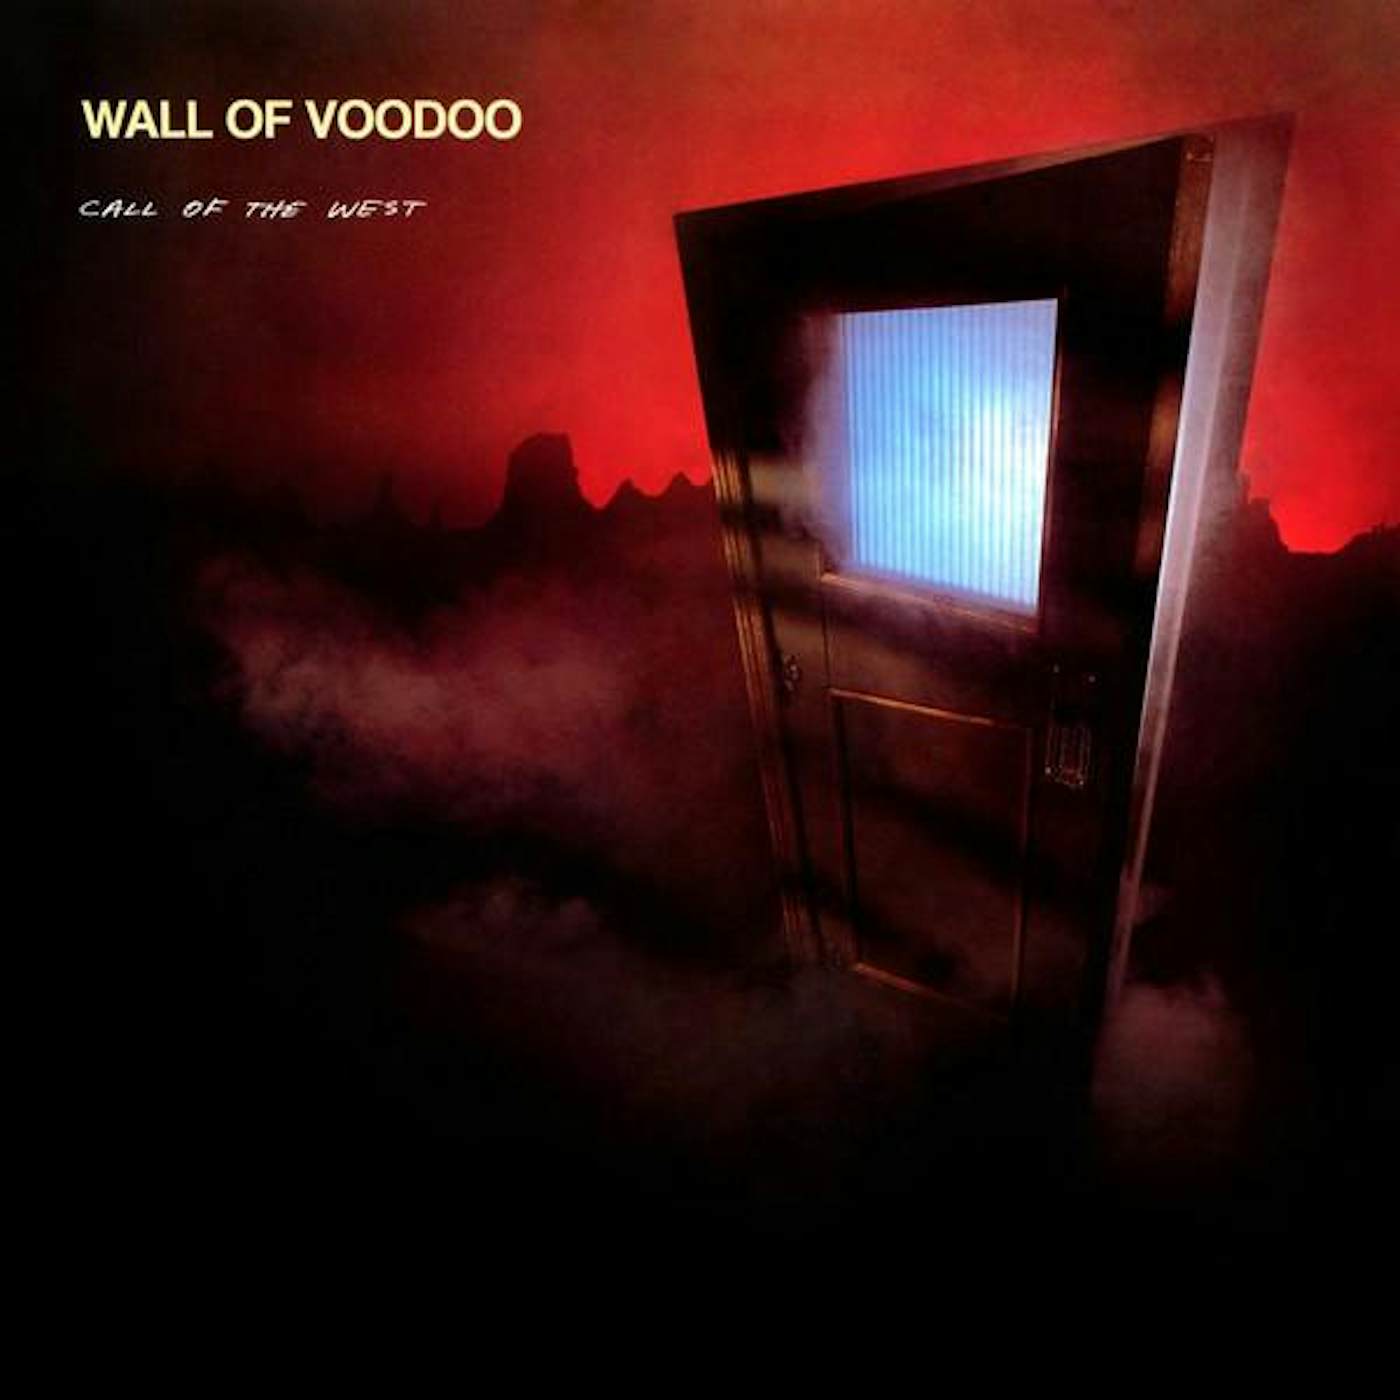 Wall Of Voodoo CALL OF WEST CD